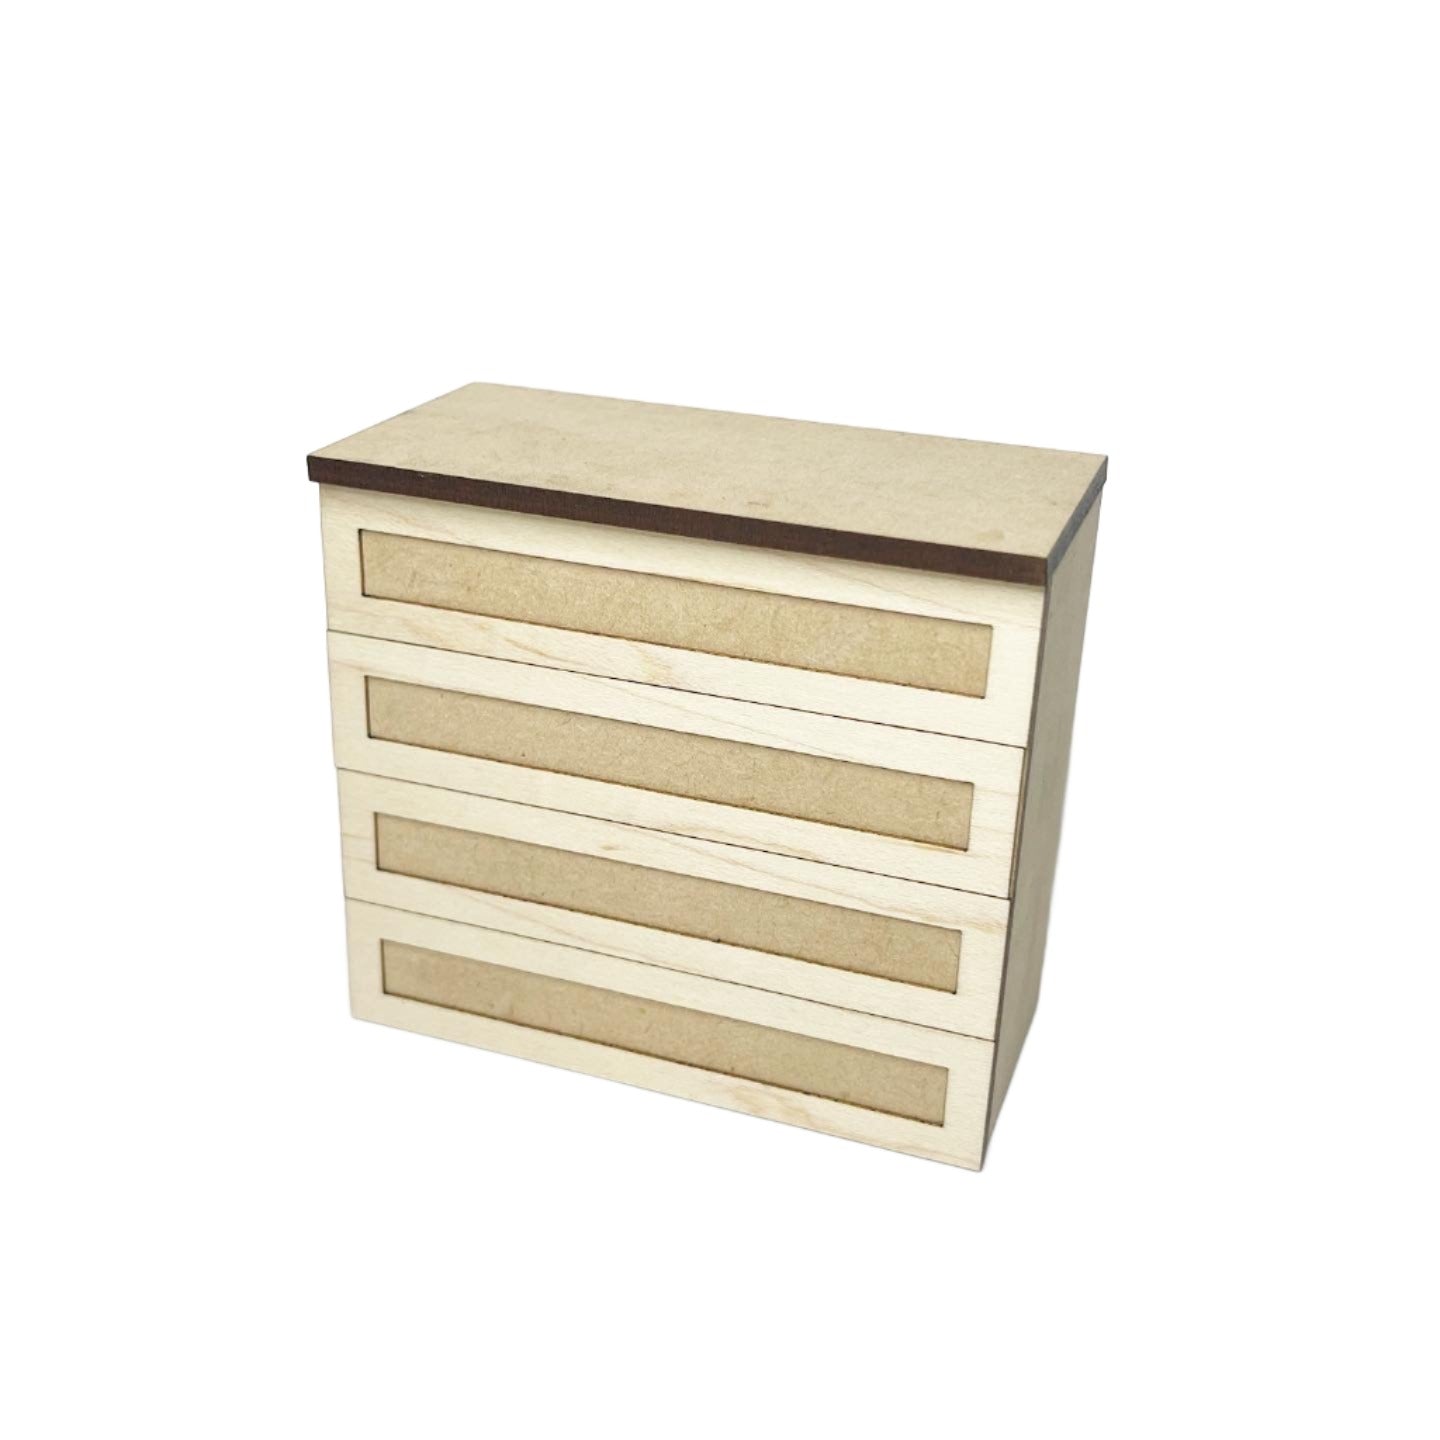 Double Lower Cabinet with 4 Drawers, Shaker